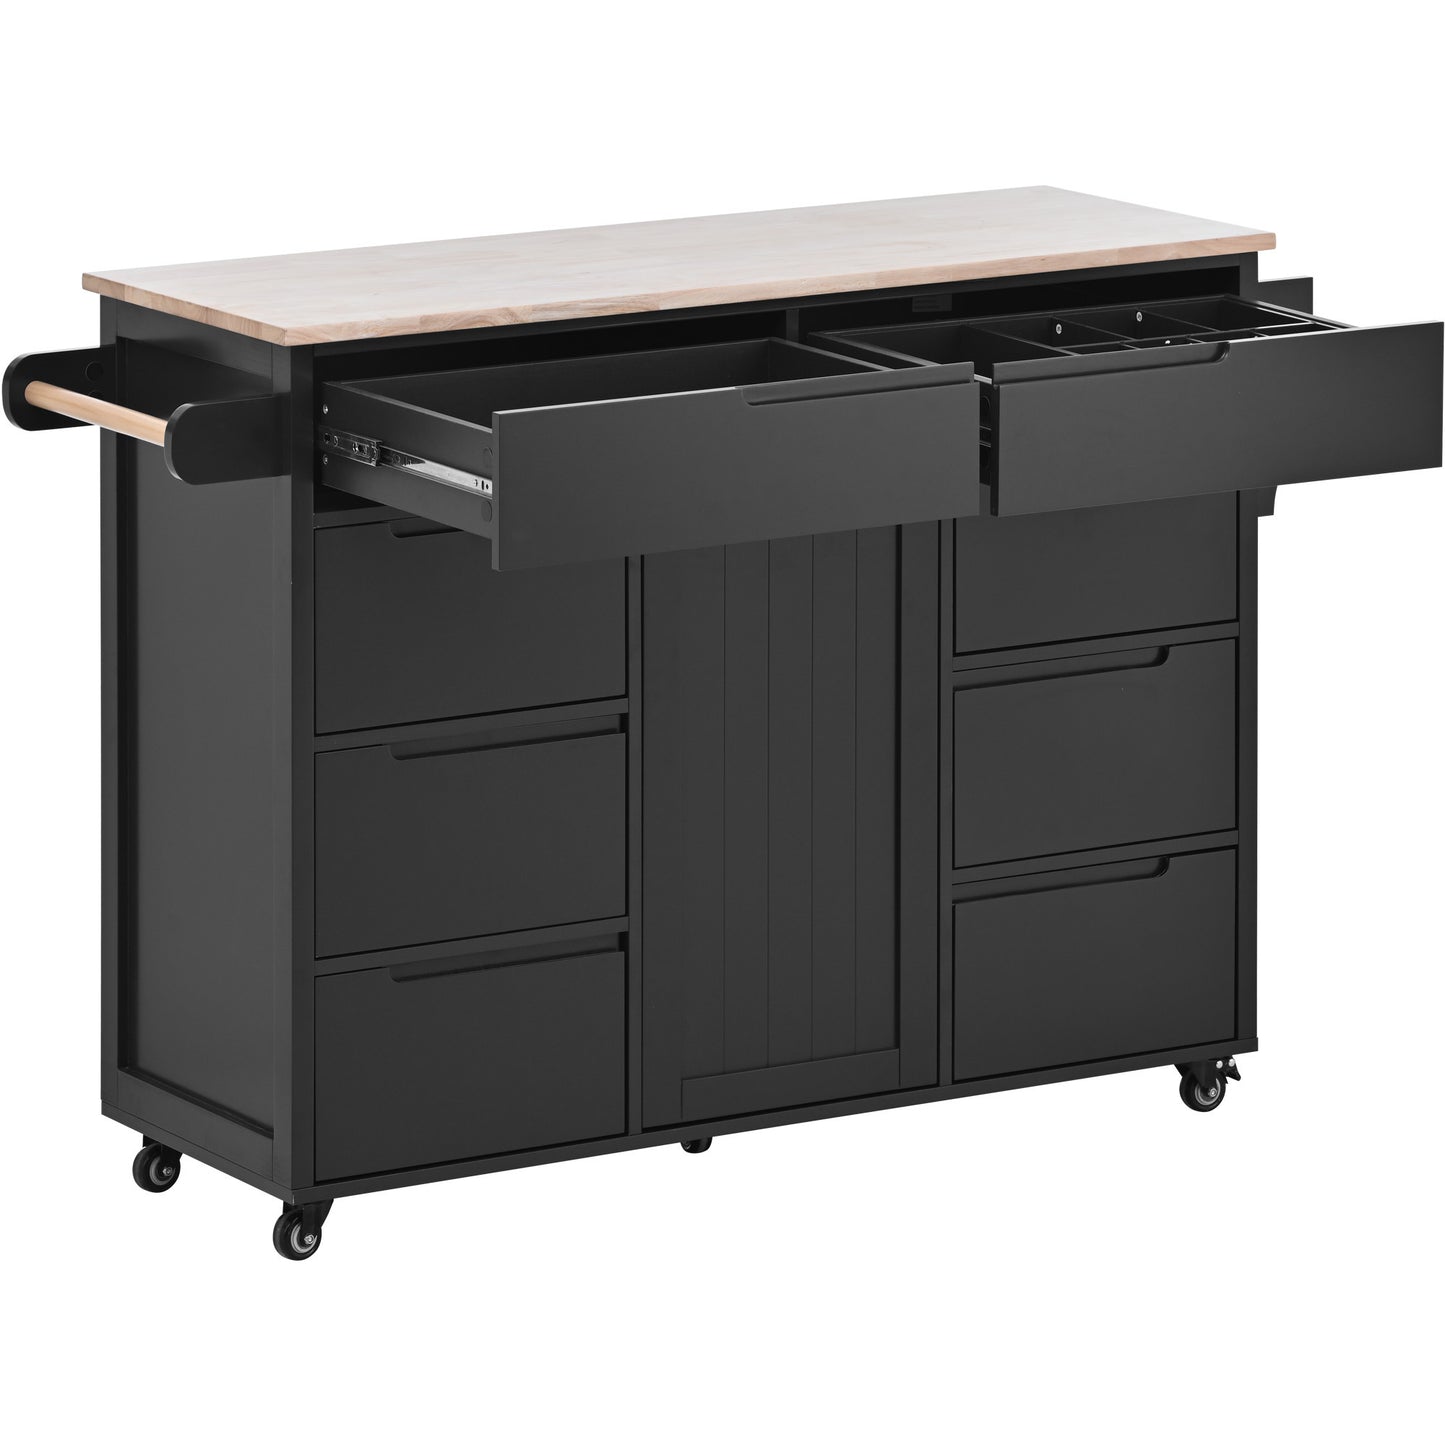 K&K Store Kitchen Cart with Rubber Wood Countertop , Kitchen Island has 8 Handle-Free Drawers Including a Flatware Organizer and 5 Wheels for Kitchen Dinning Room, Black